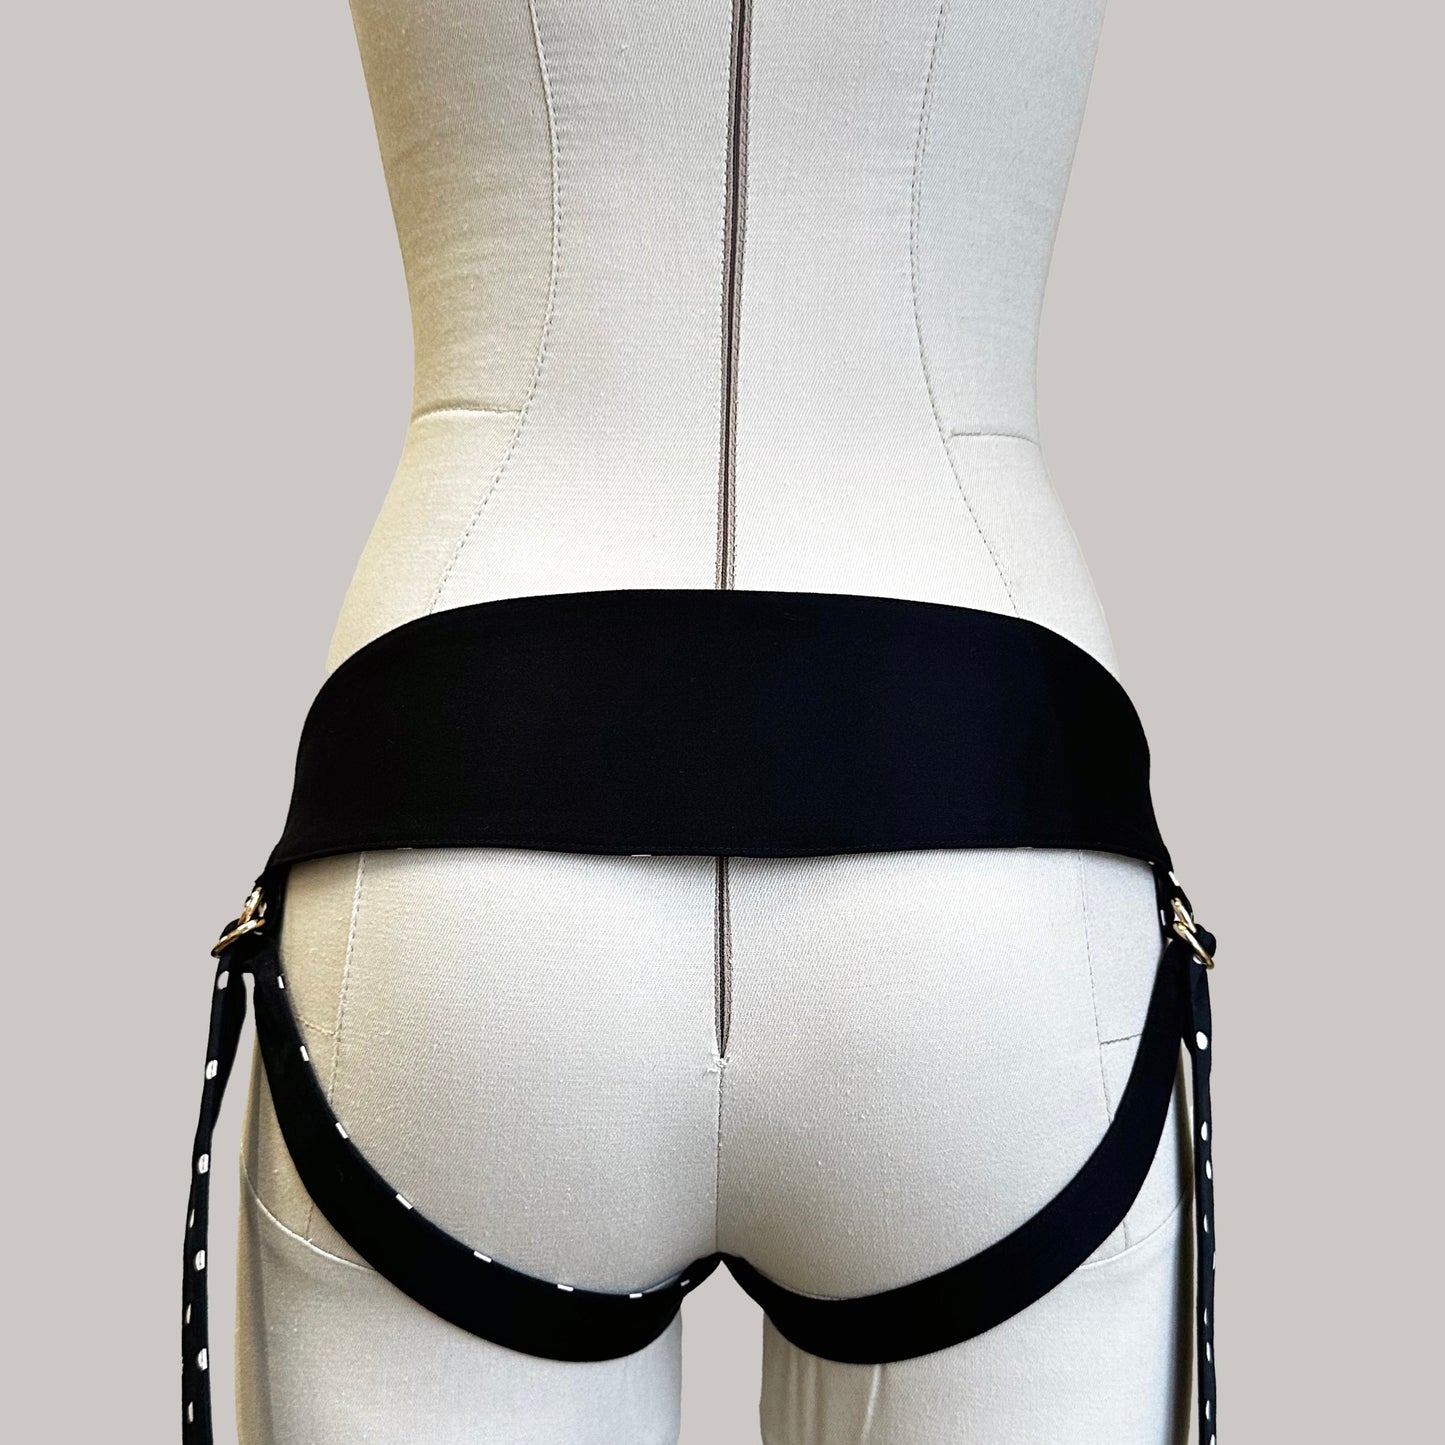 Classic Two Sides Polka Dot Velcro Mid Rise Strap-On Harness